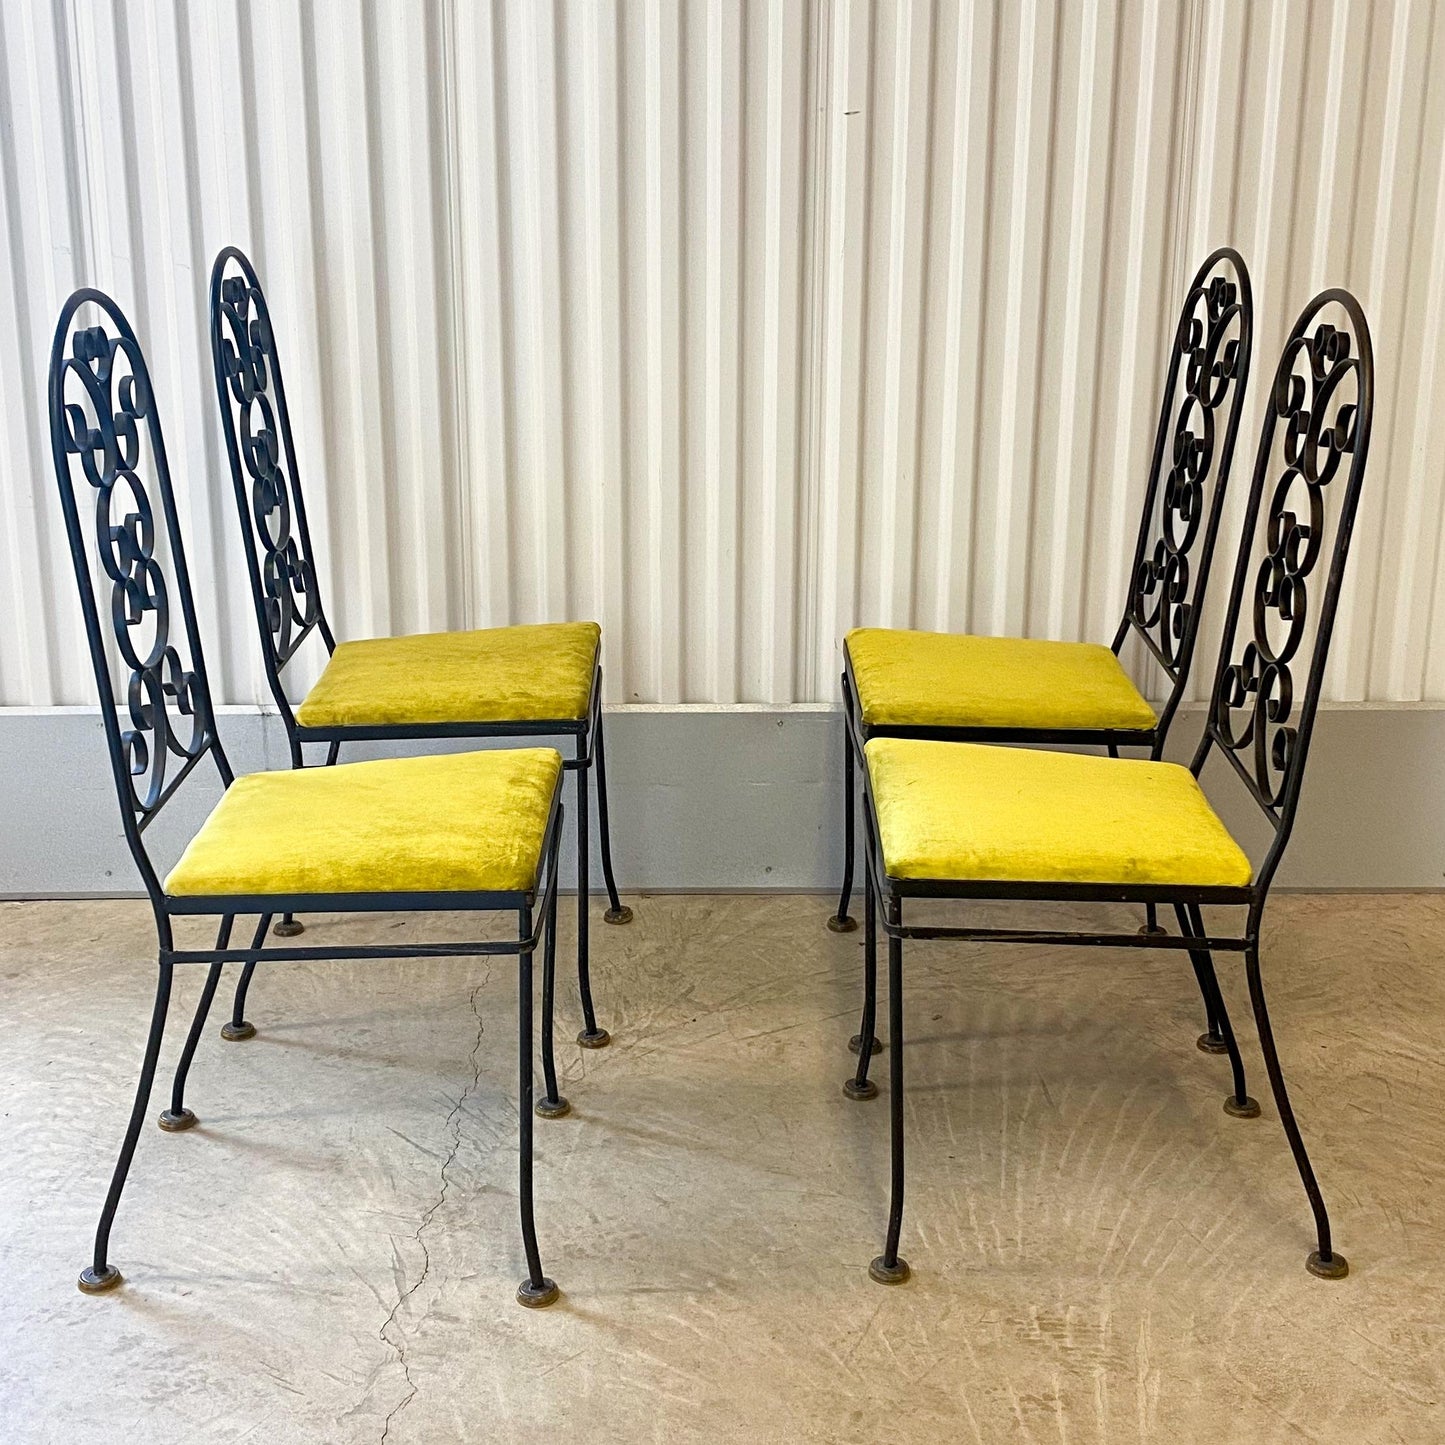 Arthur Umanoff Attributed Iron Chairs With Chartreuse Velvet Seats - Set of 4